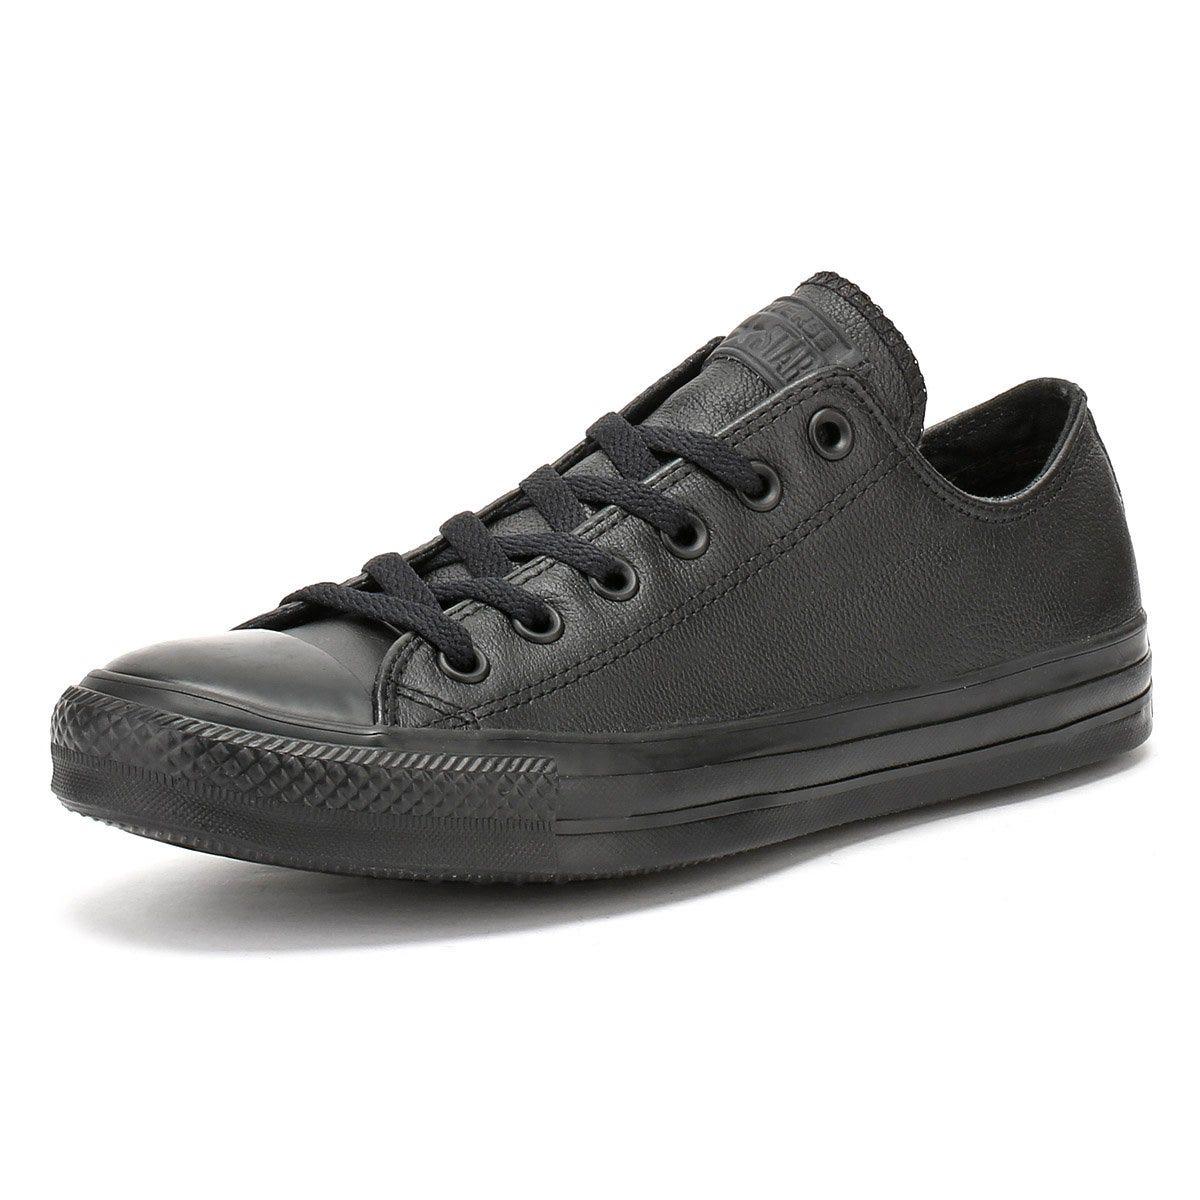 Converse All Star Ox Leather Trainers in Black for Men - Lyst